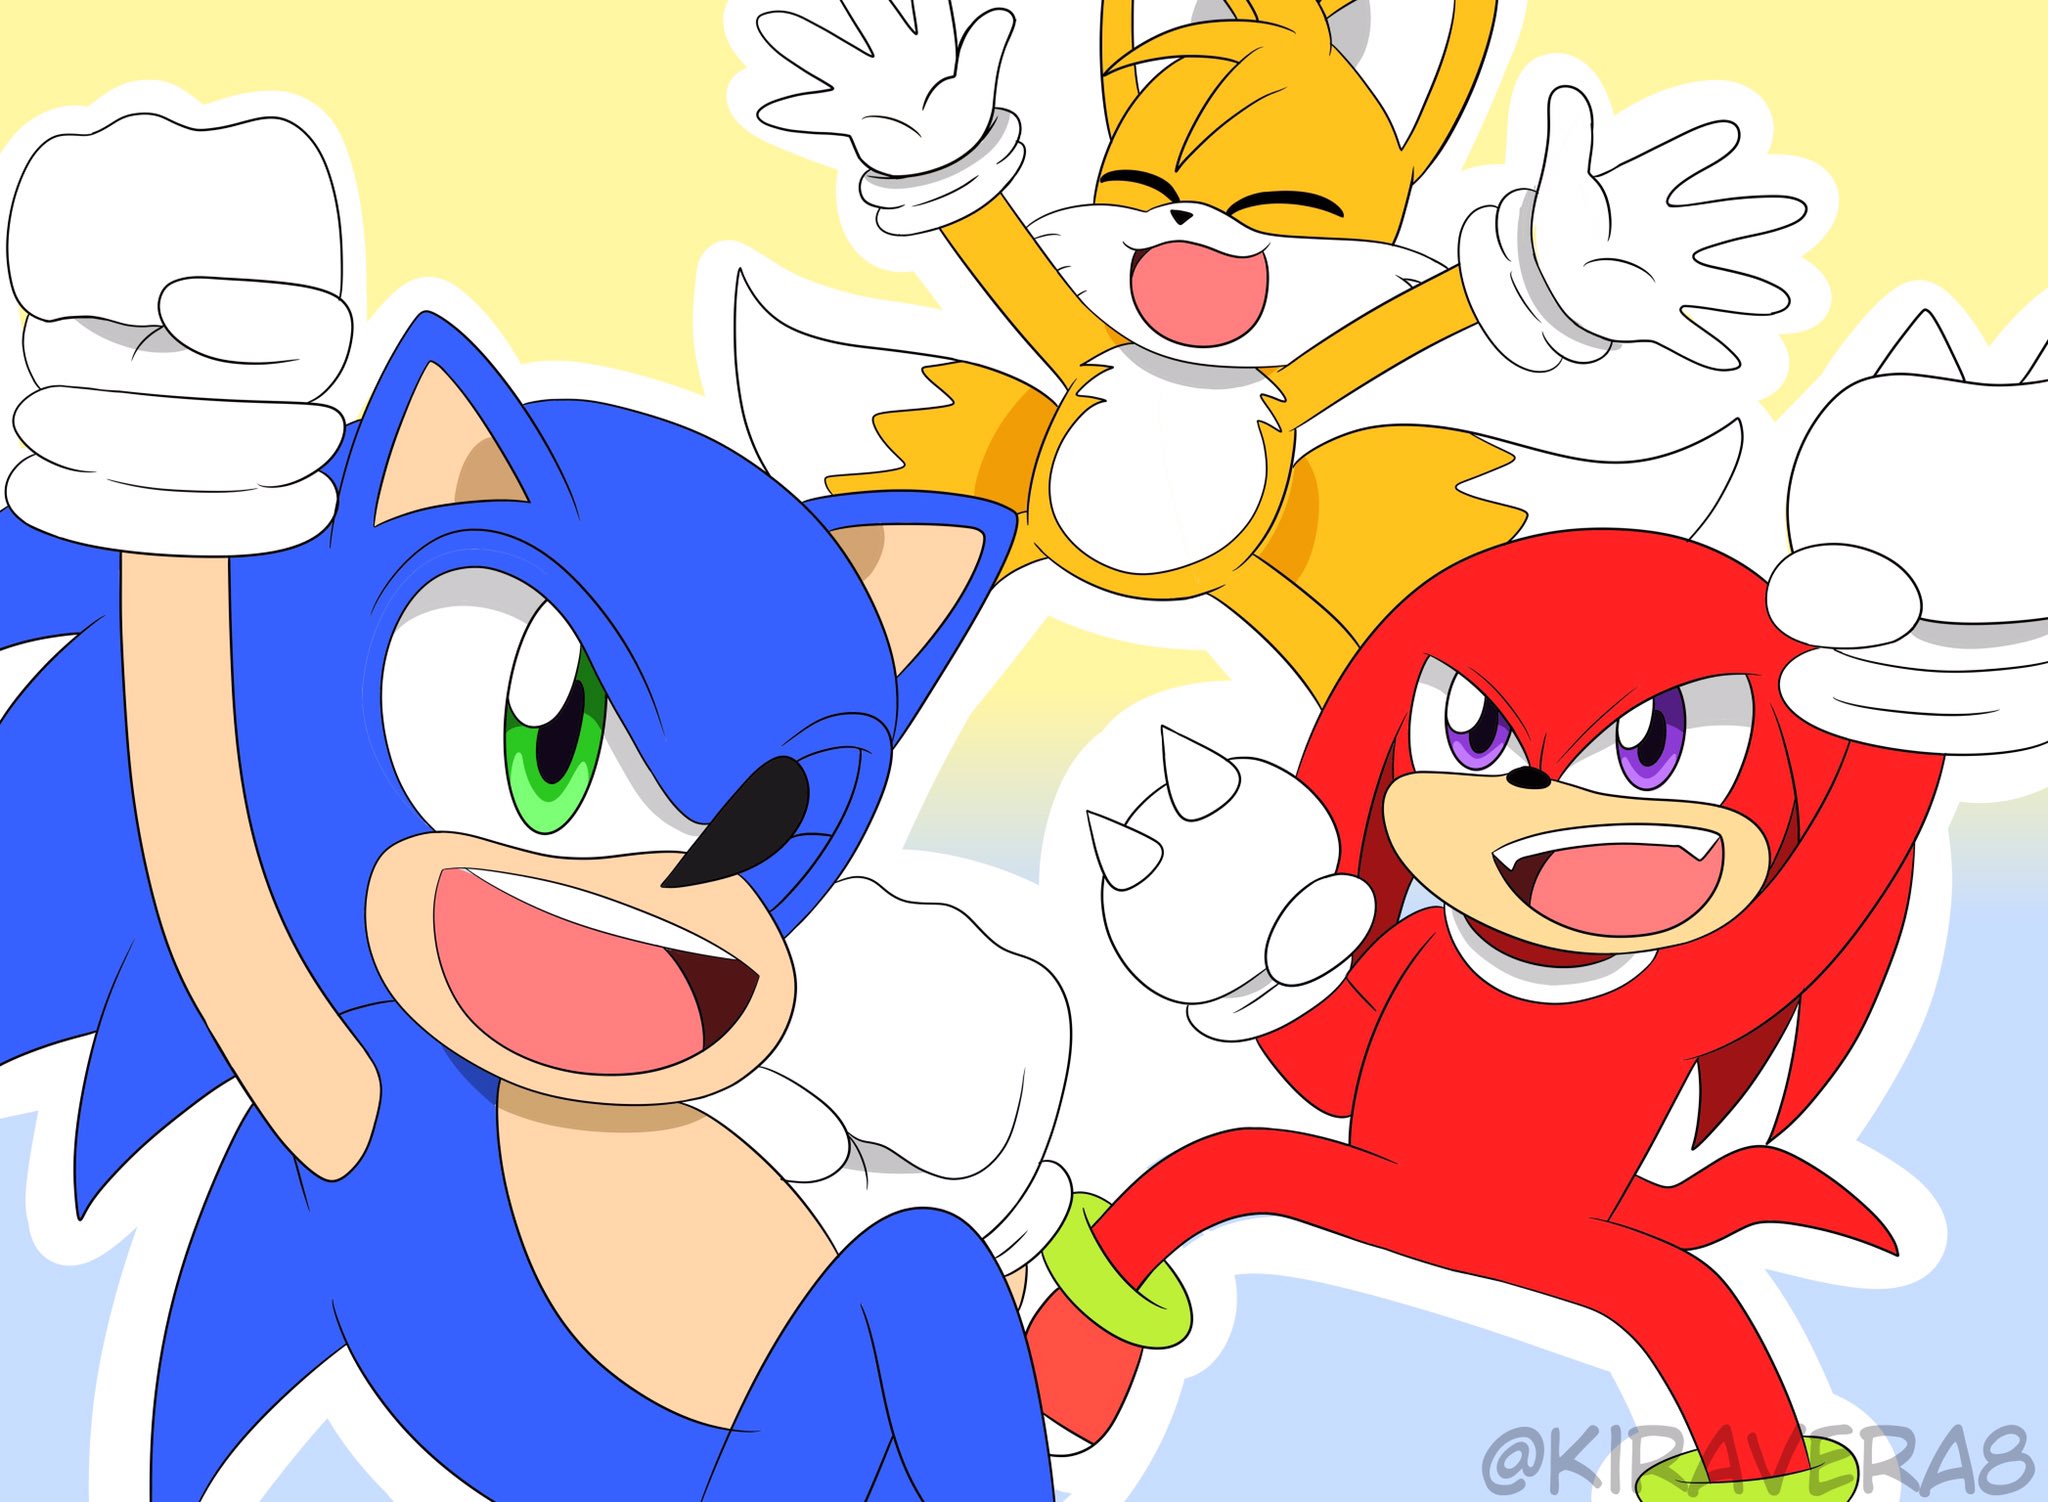 Kira (◕ᴥ◕)✨@Paldea! on X: they are the sonic heroes!! #Sonic   / X